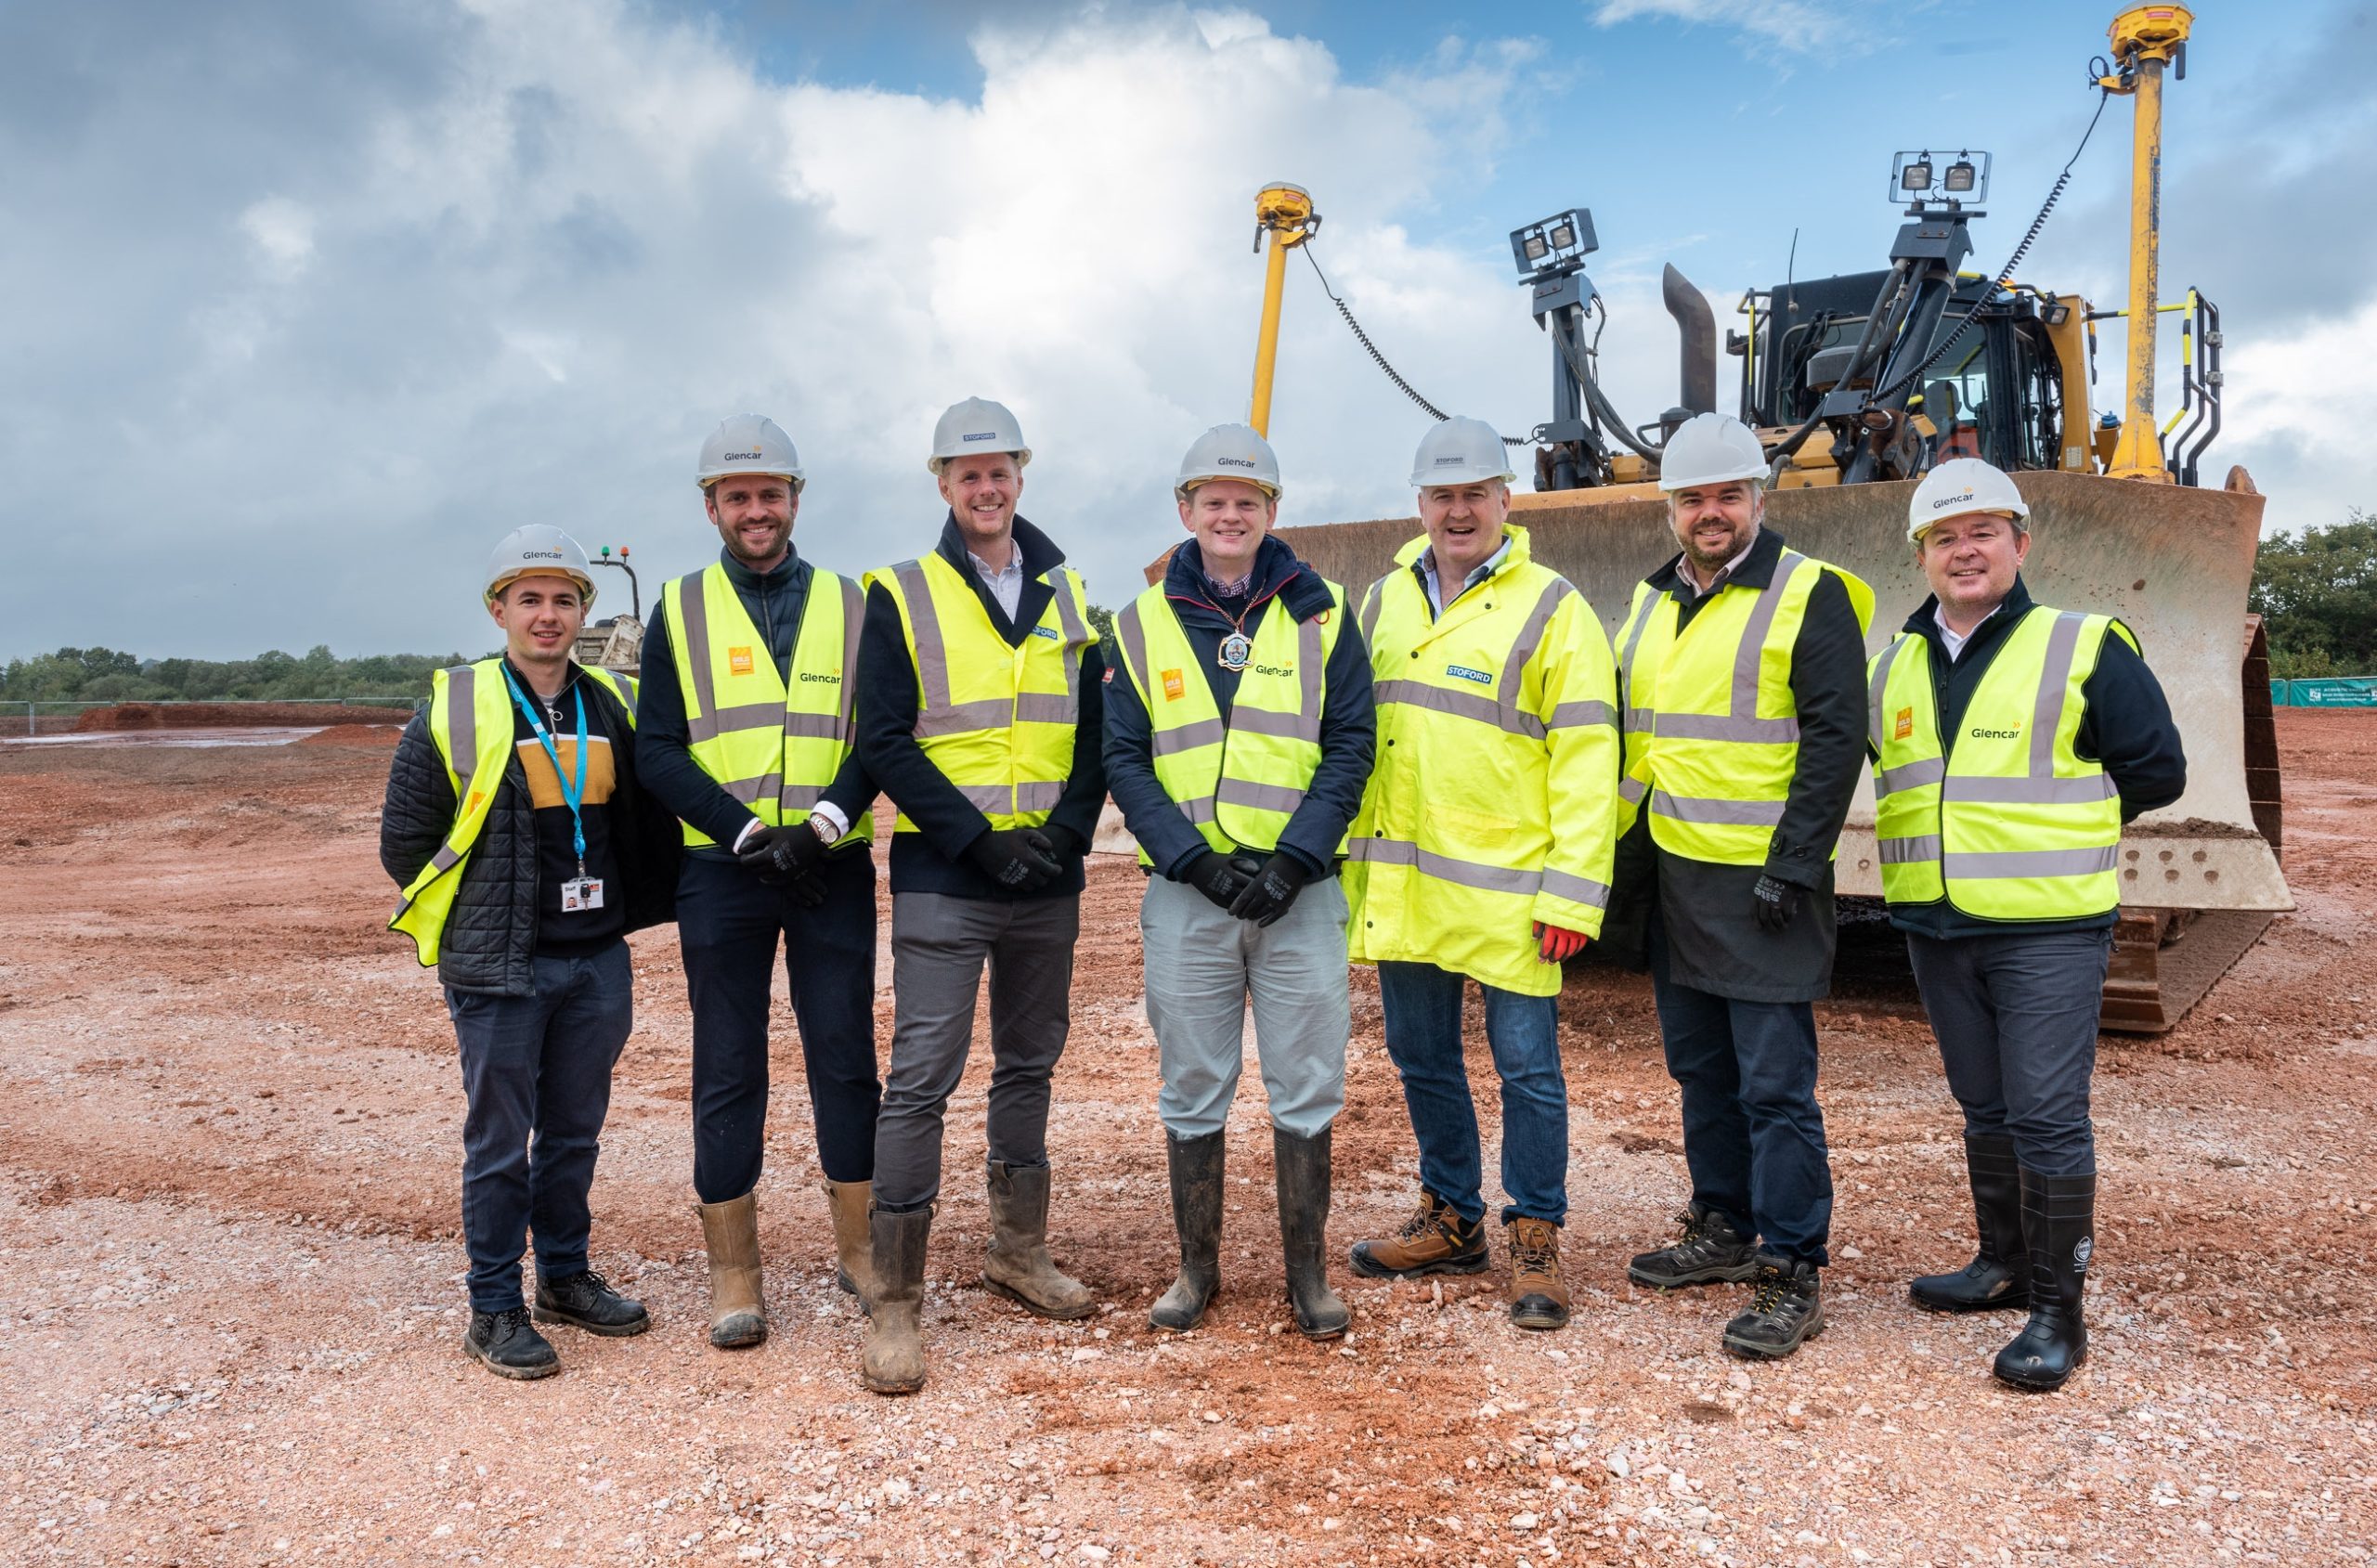 Work starts on a new retail fulfilment centre at Exeter Logistics Park